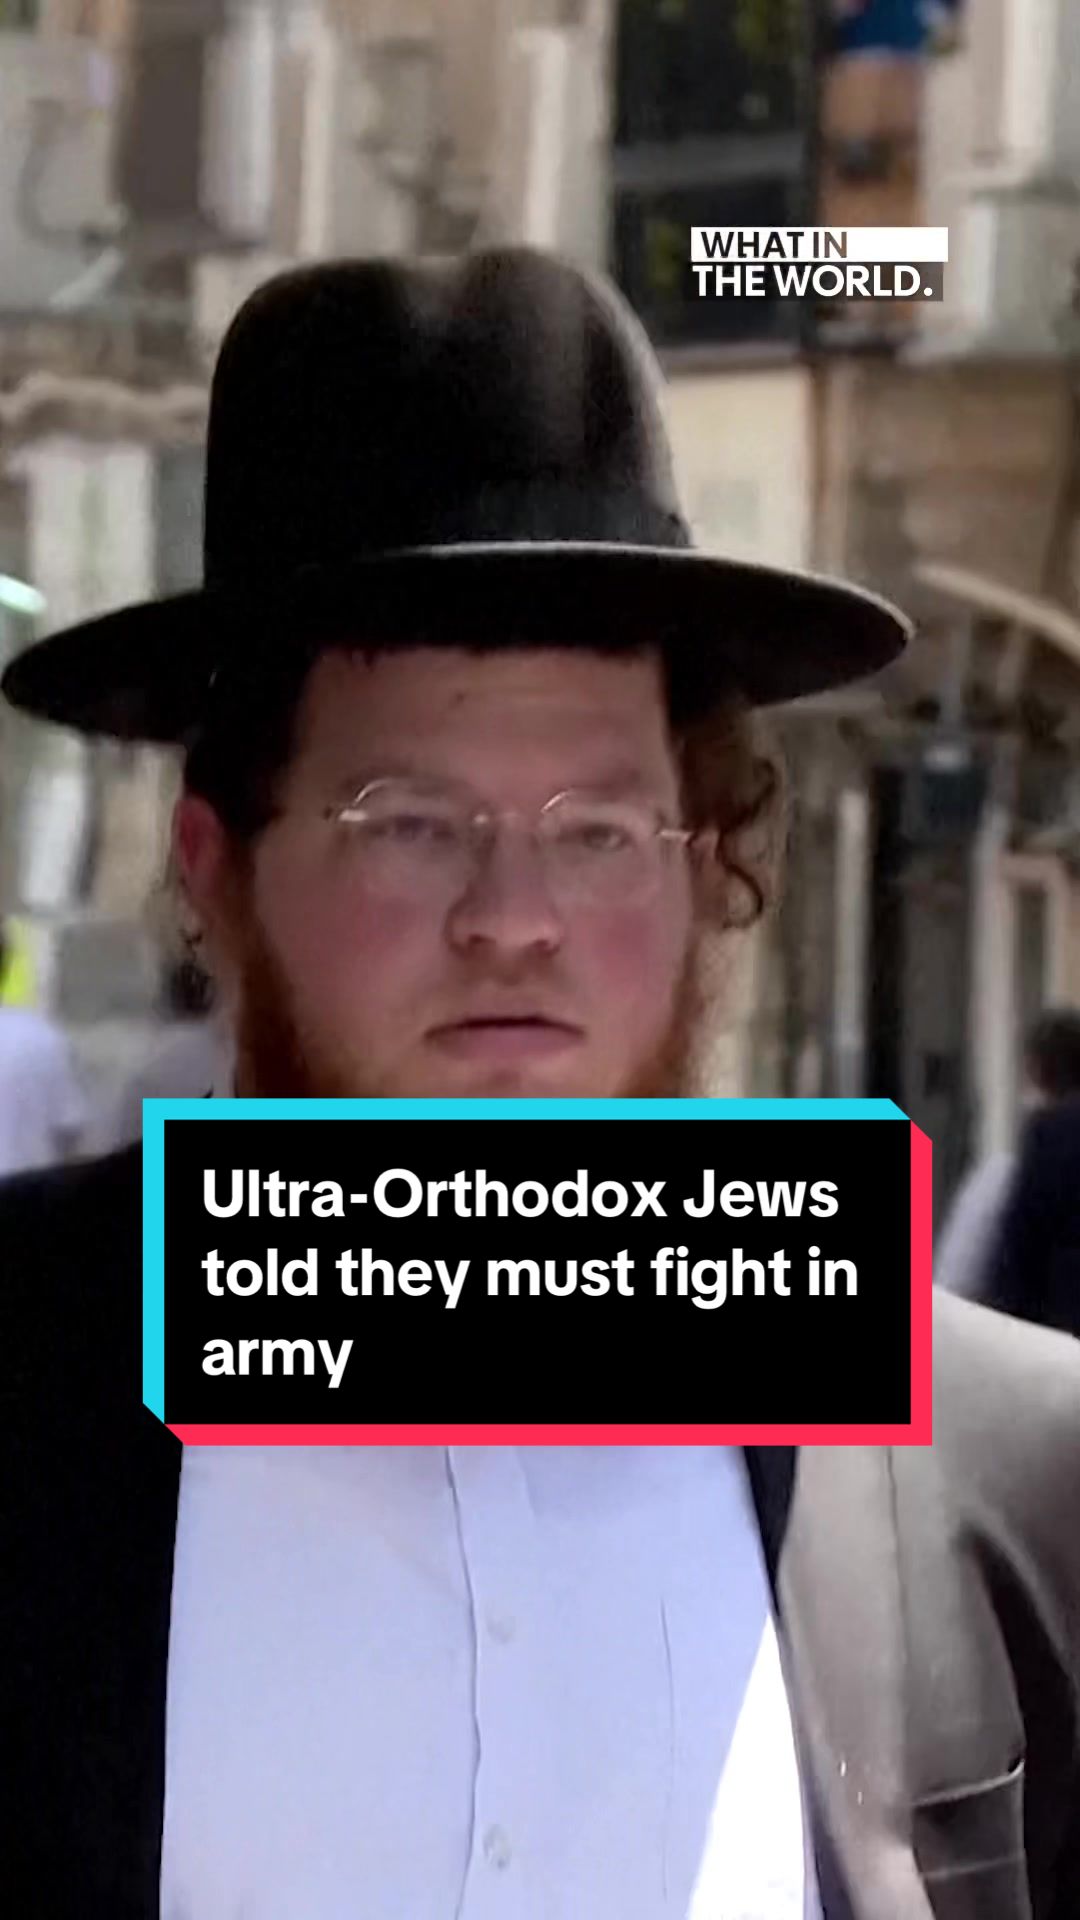 The Israeli supreme court has ruled that Ultra-Orthodox men must be drafted into military service, a controversial decision that could threaten the stability of the government. #israel #ultraorthodox #army #channel4news